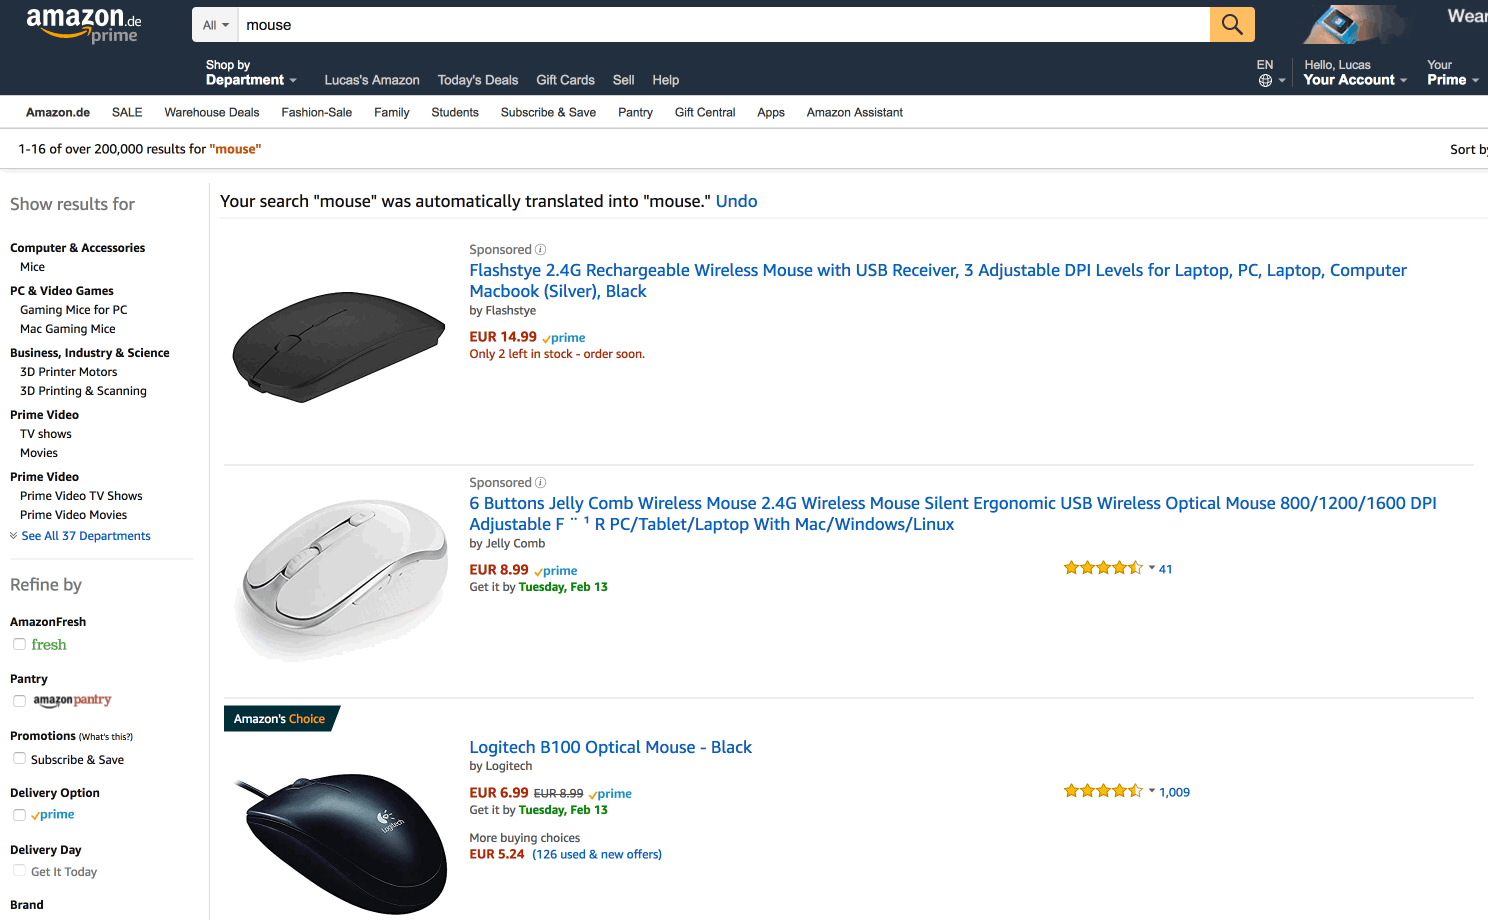 Contains animated gif of a mouse search's result on Amazon.